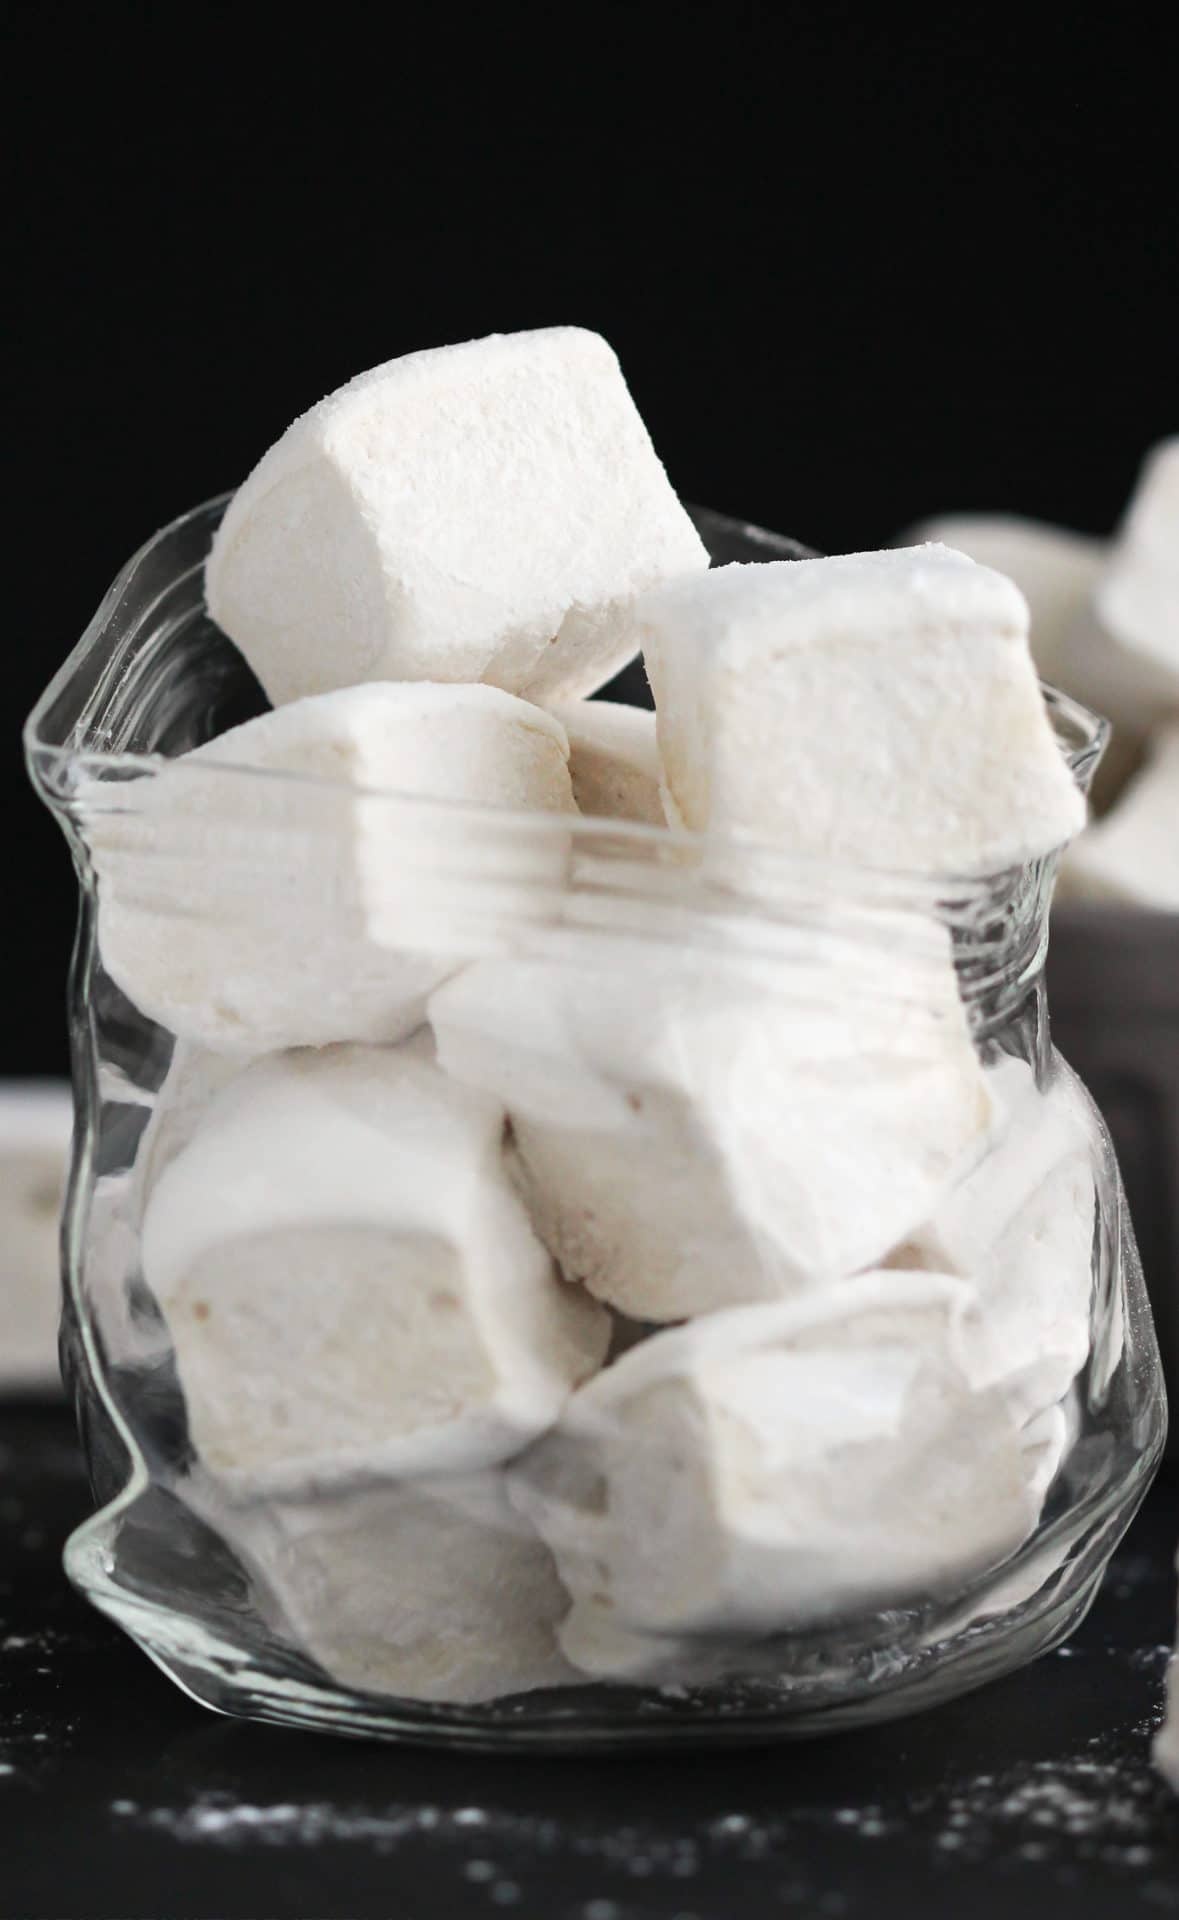 Marshmallow: Started out as a honey candy that was flavored and thickened with Marsh-Mallow plant sap. 1180x1920 HD Background.